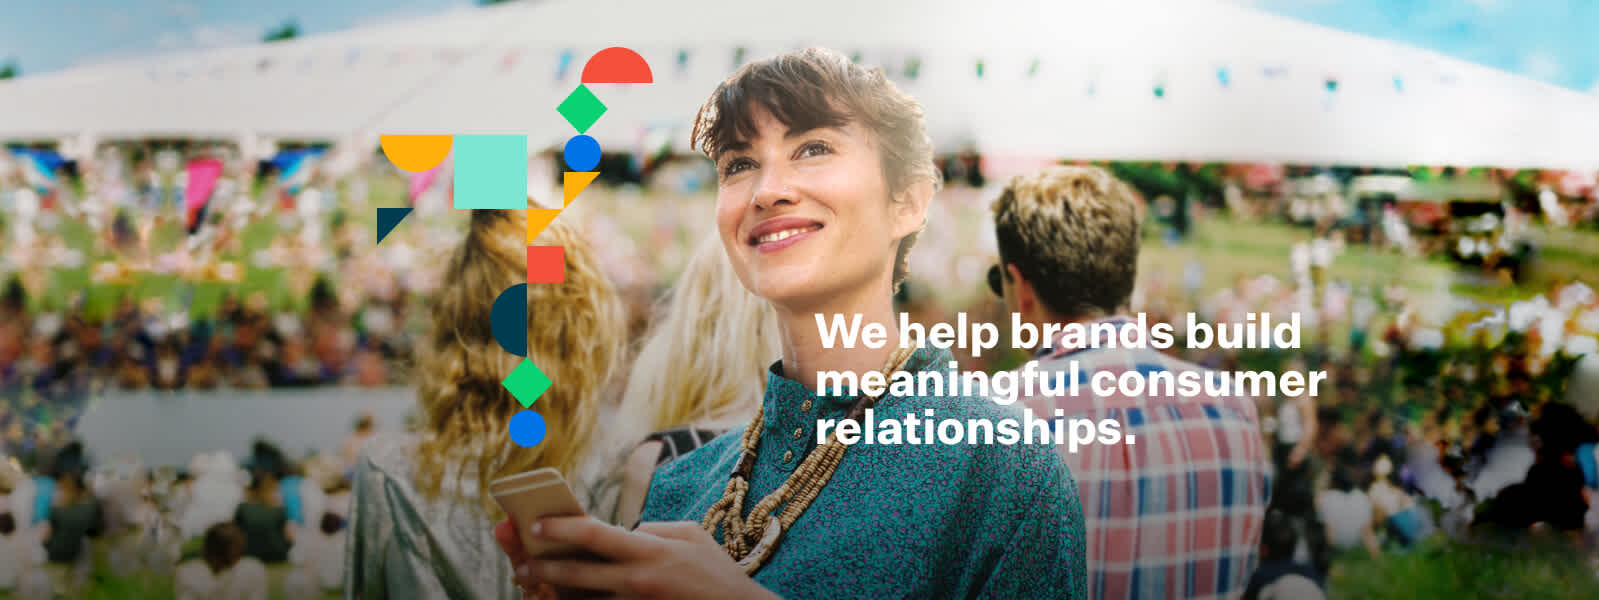 Banner design created for Peazie. The design features the colourful shapes from the brand overlayed on an image of a woman using her phone at a festival. The slogan reads 'We help brands build meaningful consumer relationships.'